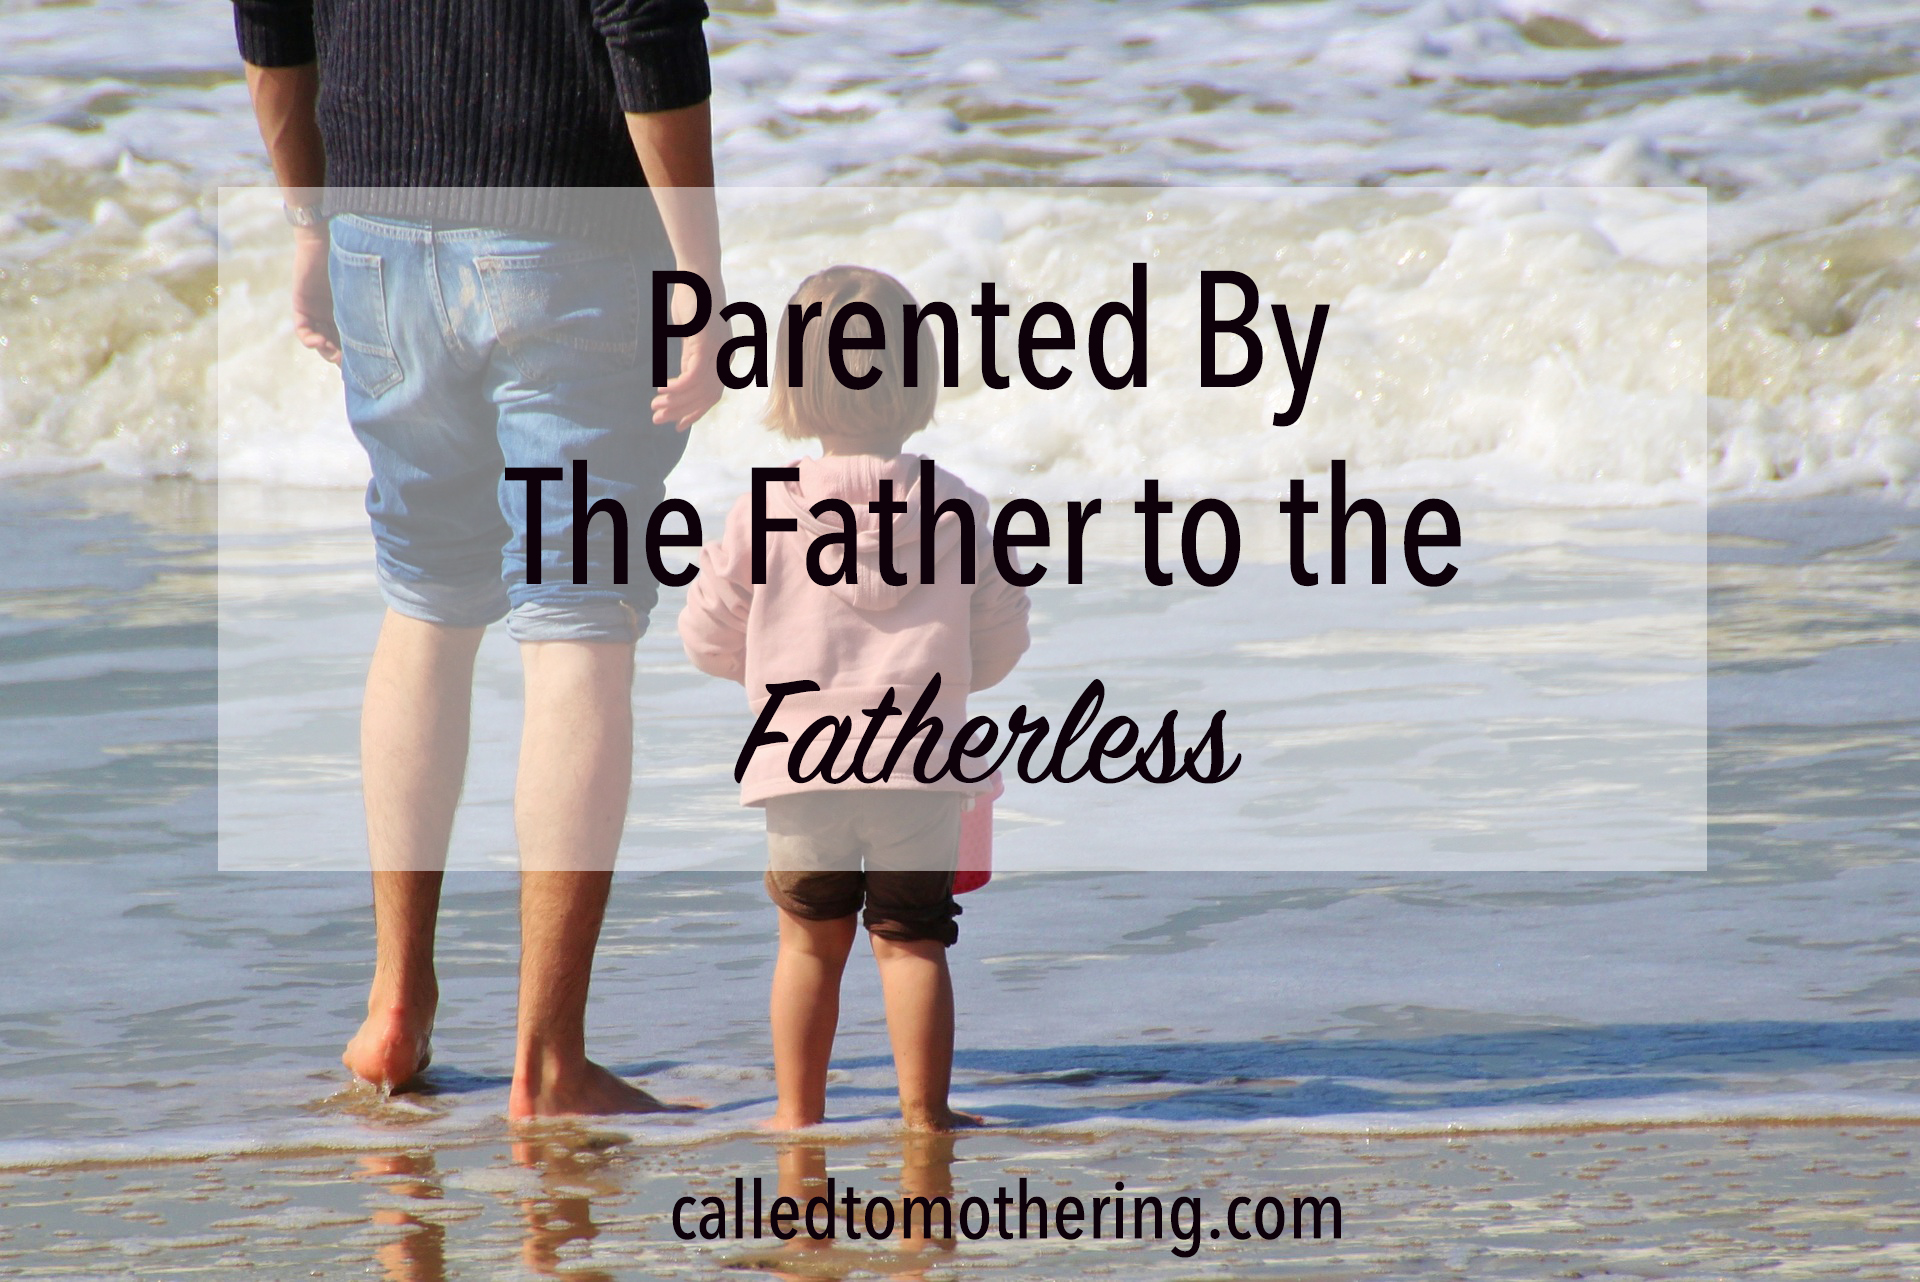 Parented By The Father to the Fatherless